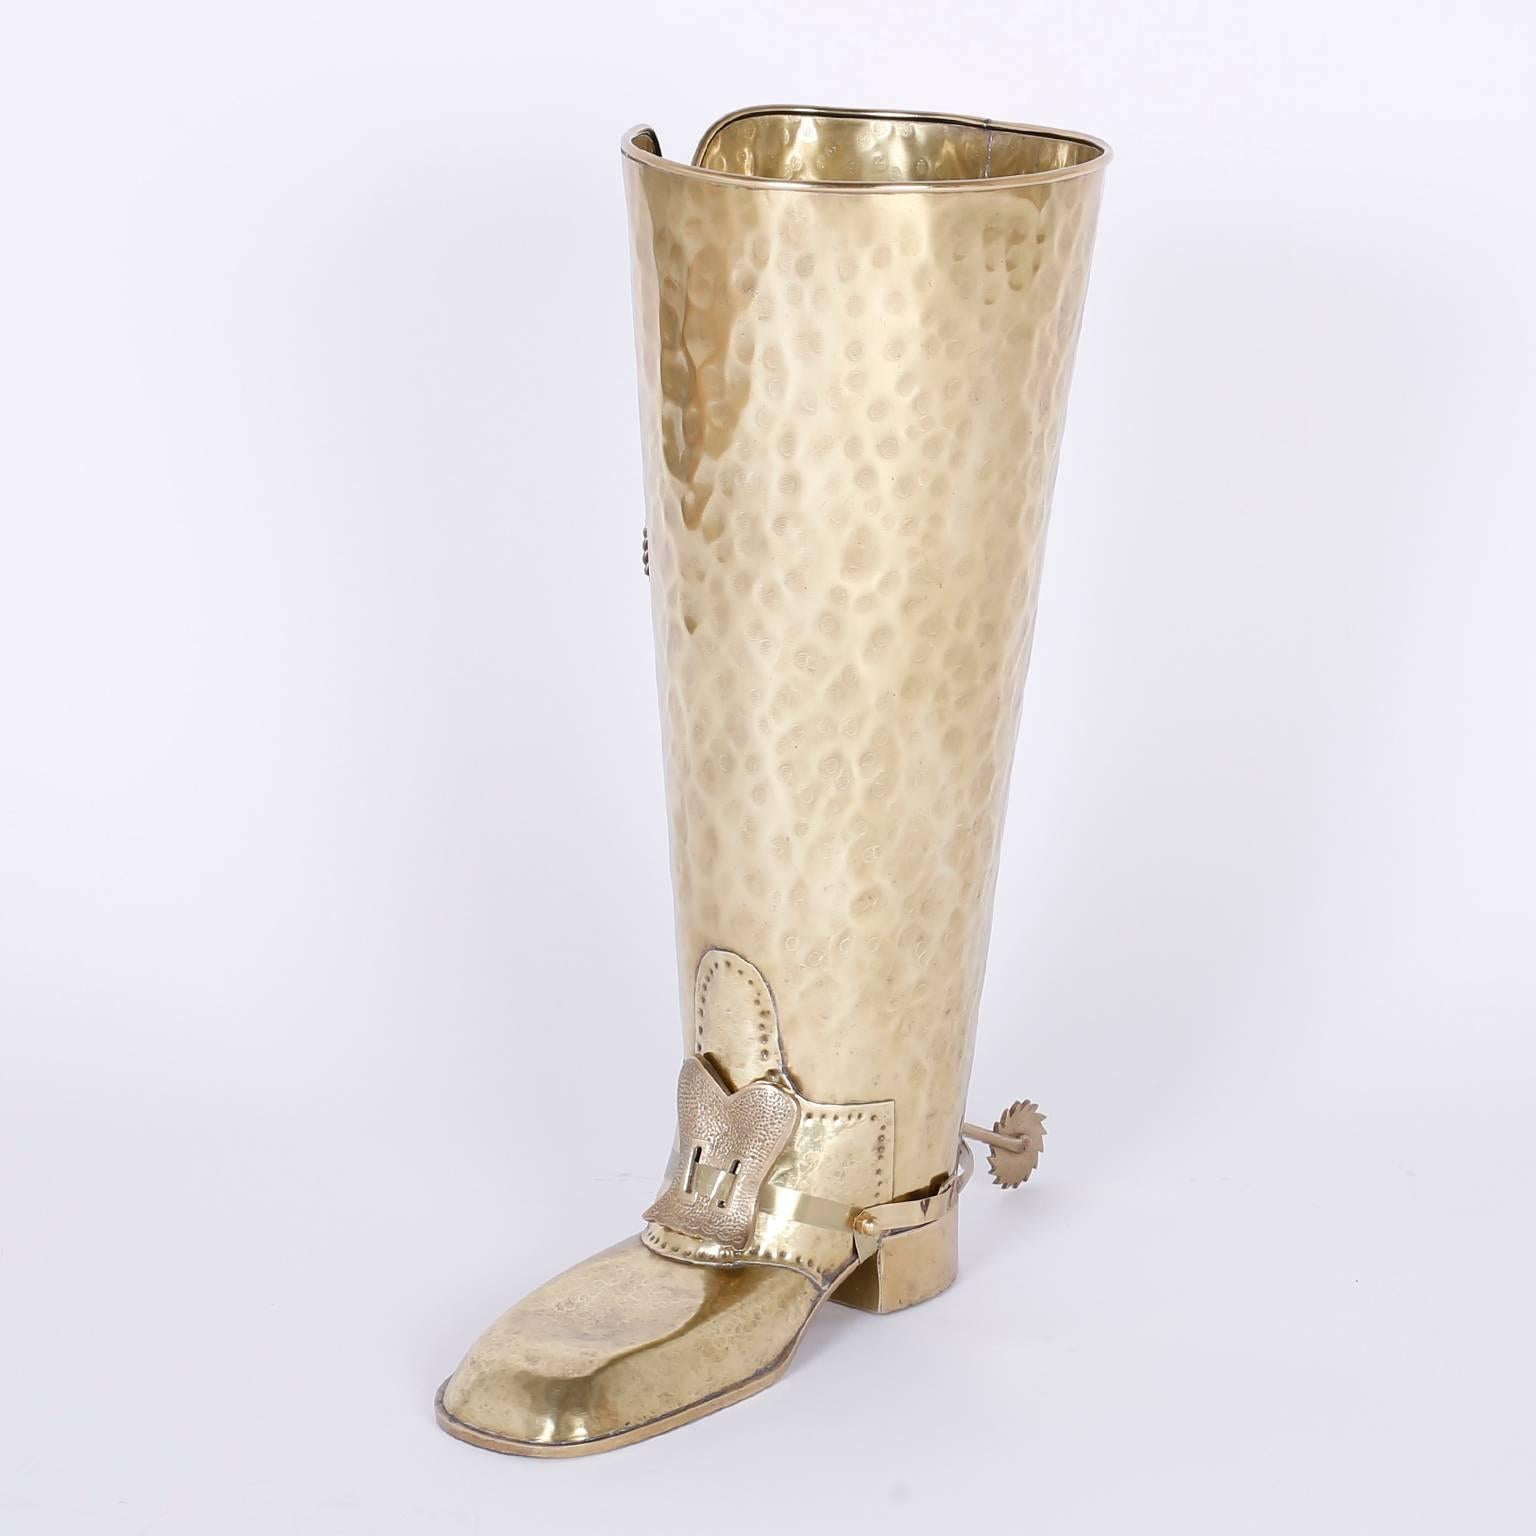 Whimsical umbrella stand crafted in the midcentury with brass featuring laces, buckles, and spurs hand hammered and looking a lot like a conquistador's boot.